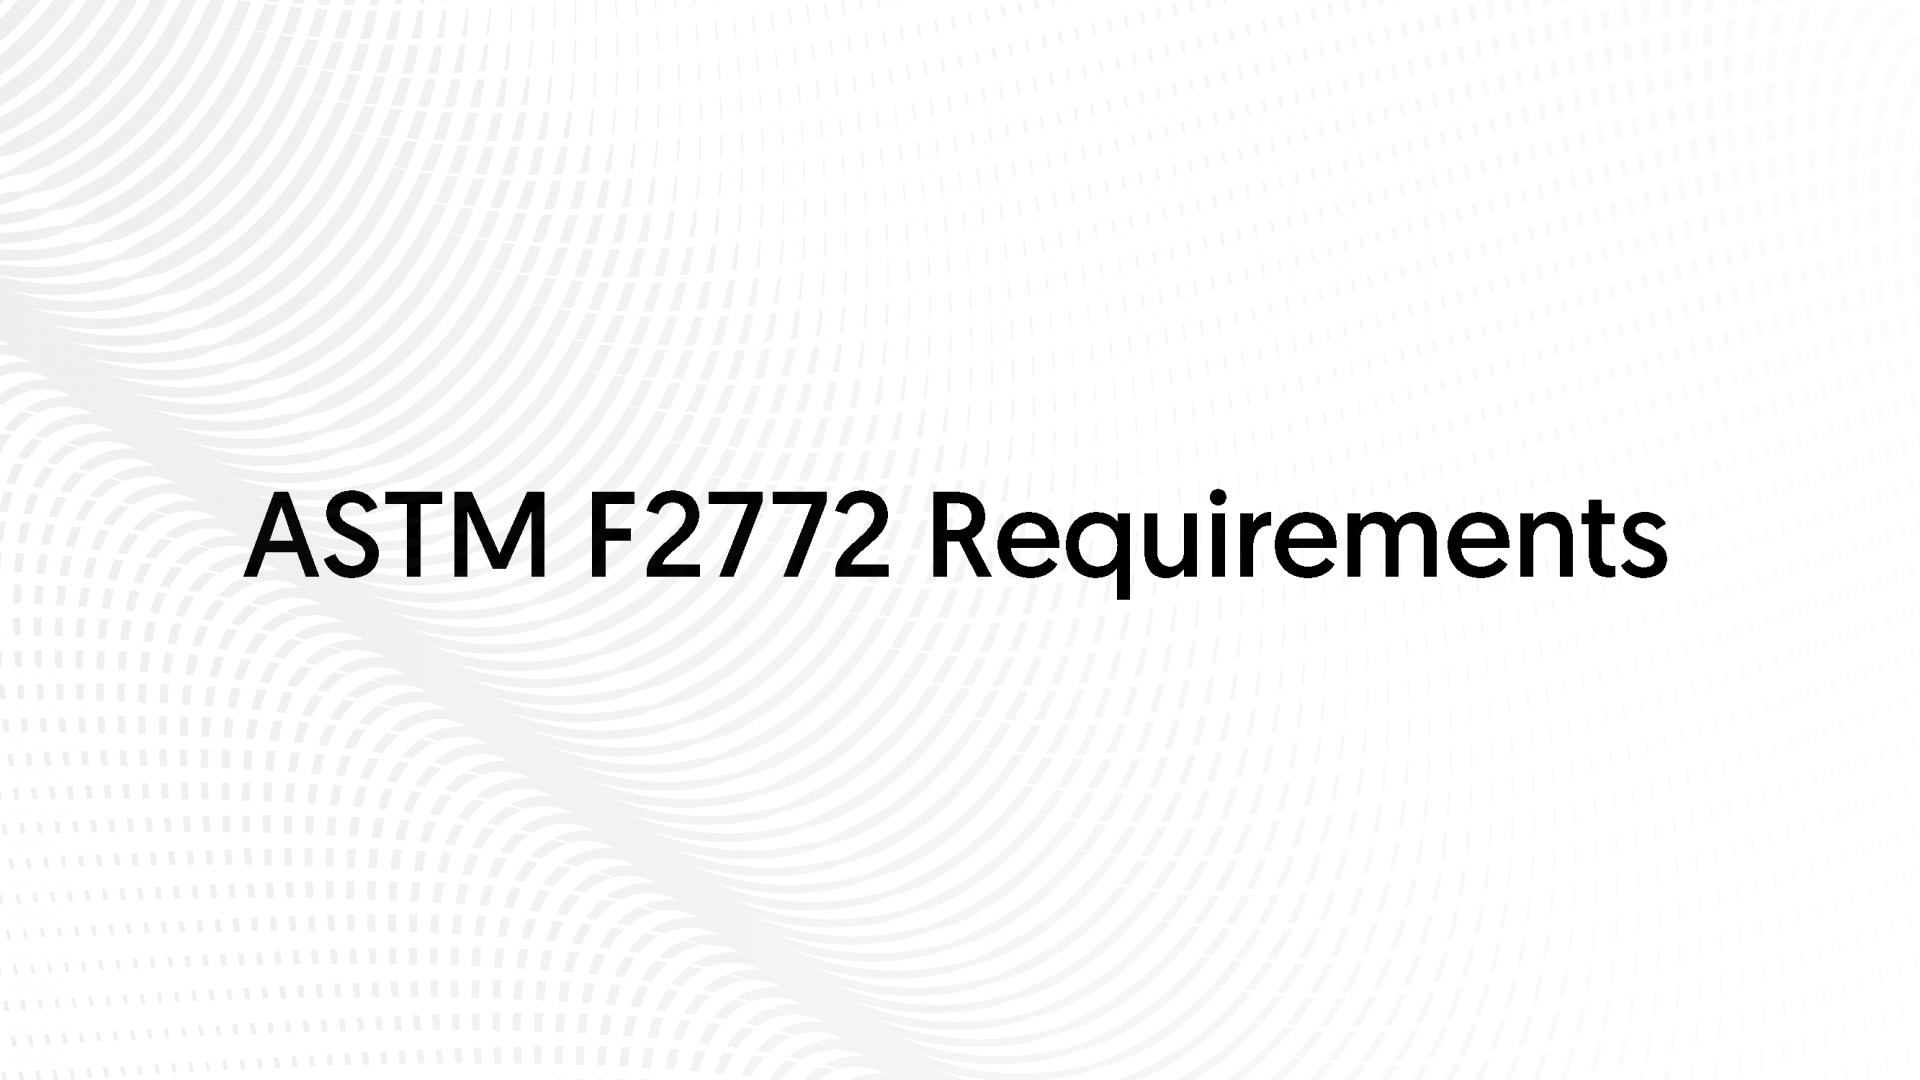 ASTM F2772 Requirements